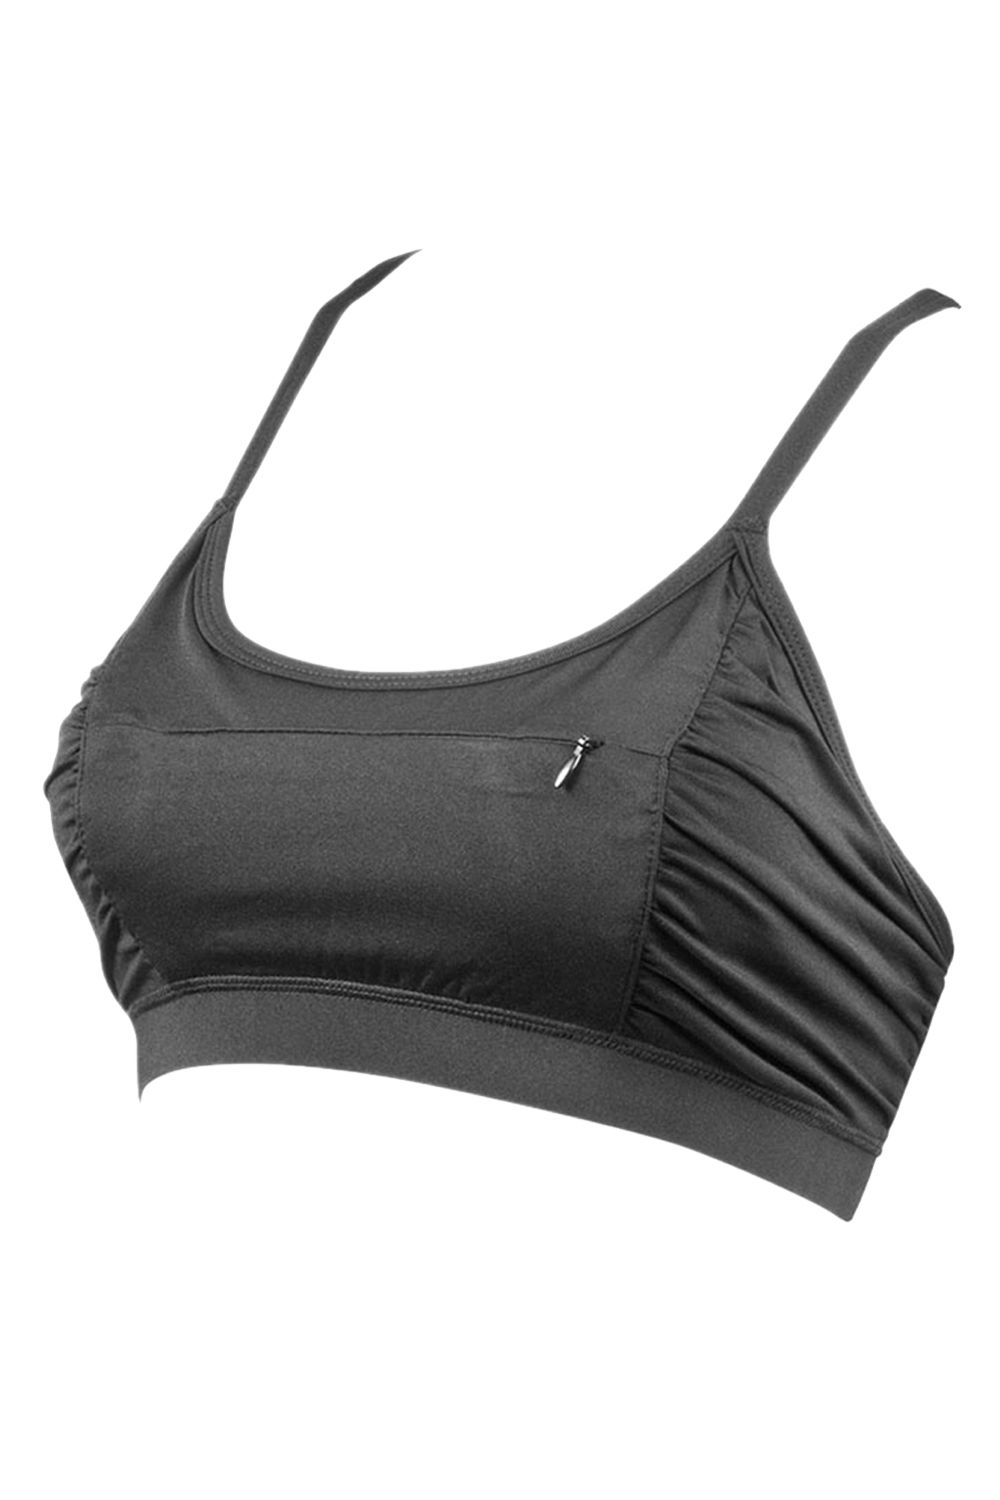 travel bra with pockets - OFF-61% >Free Delivery